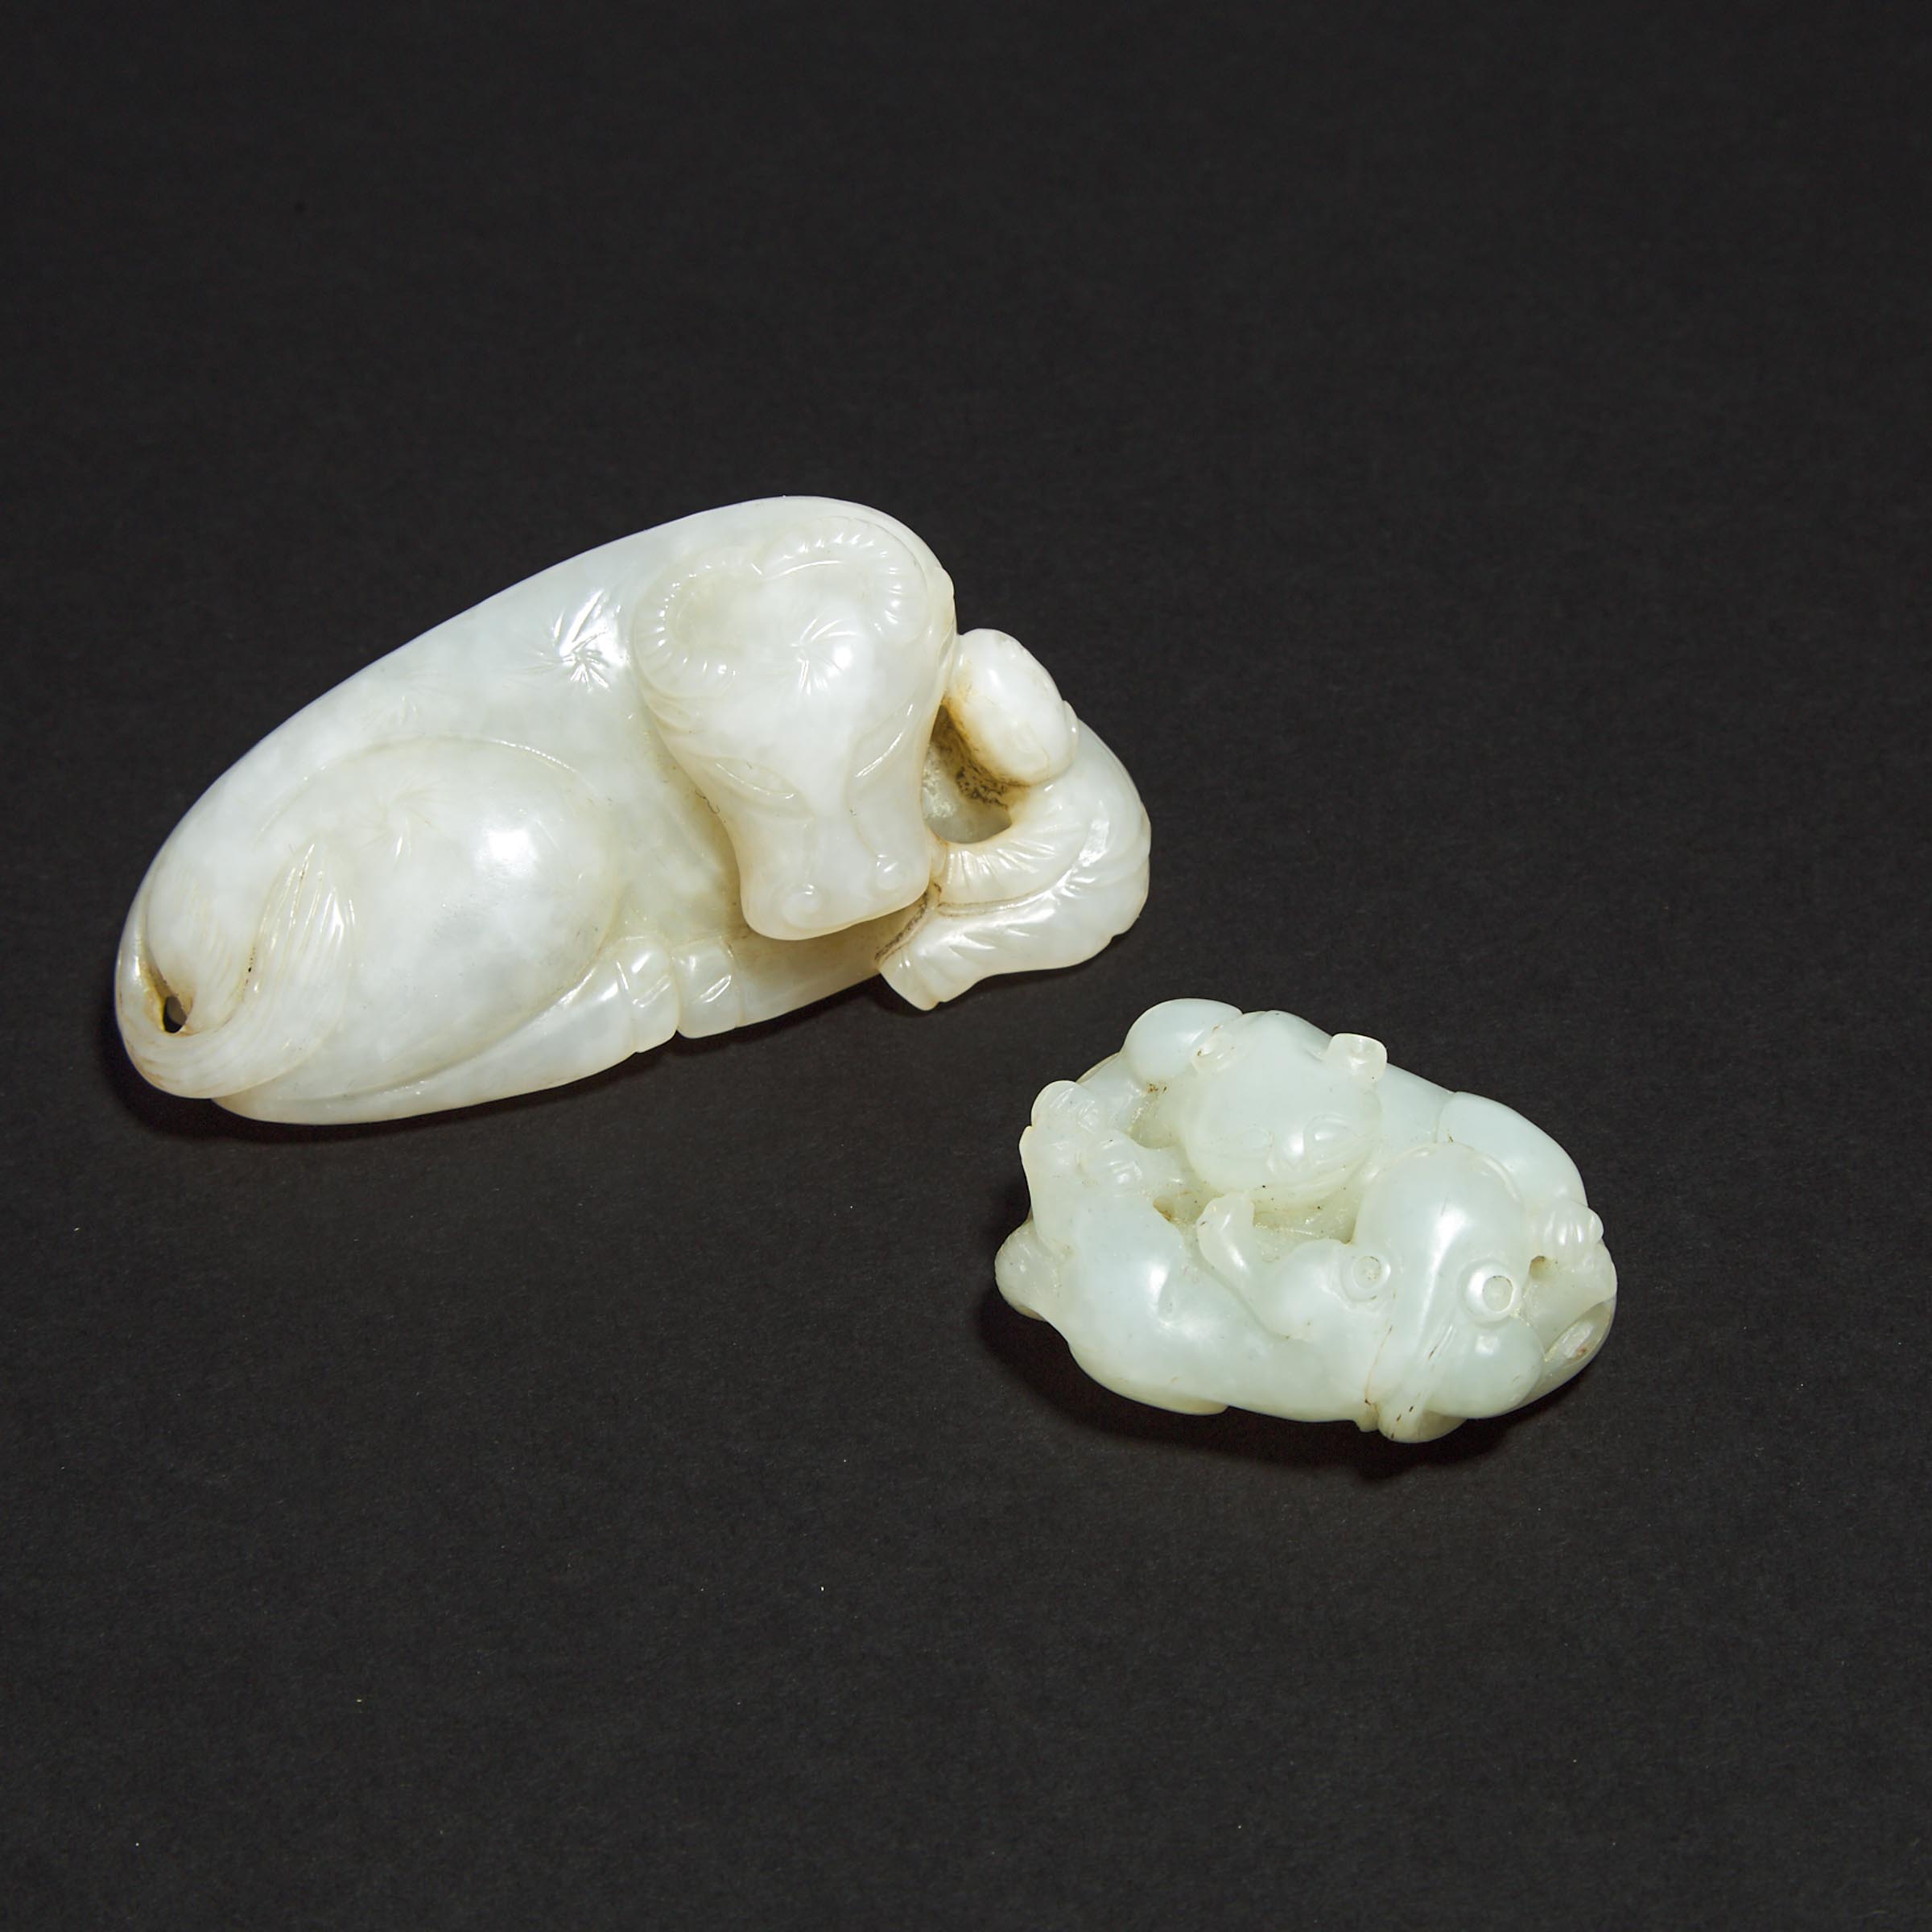 A White Jade 'Buffalo and Boy' Group, together with a White Jade 'Double-Cat' Pendant